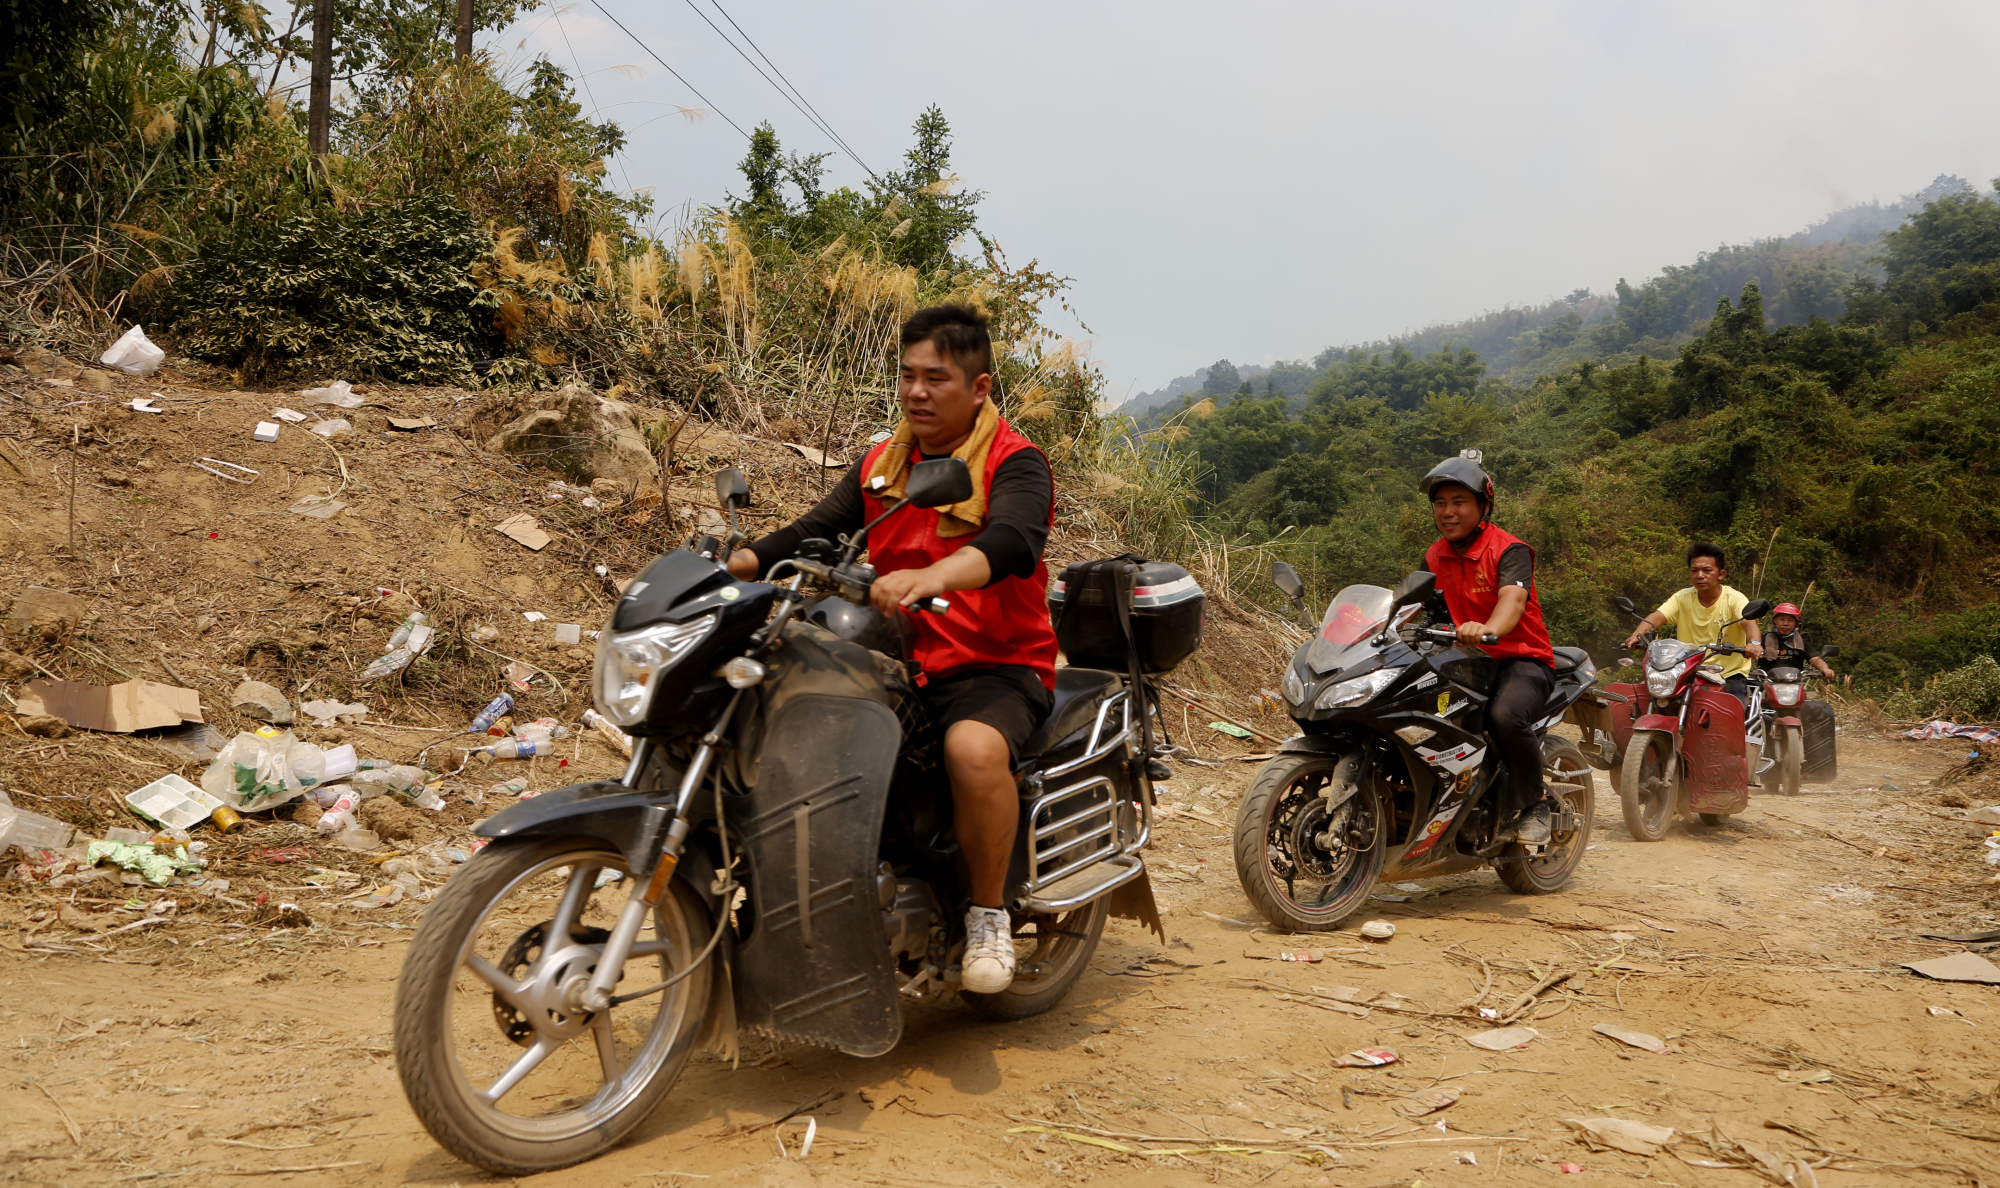 Volunteer couriers, locals and motorcycle enthusiasts have from from all corners of Chongqing to assist in delivering key supplies up remote roads. (Photo by iChongqing)